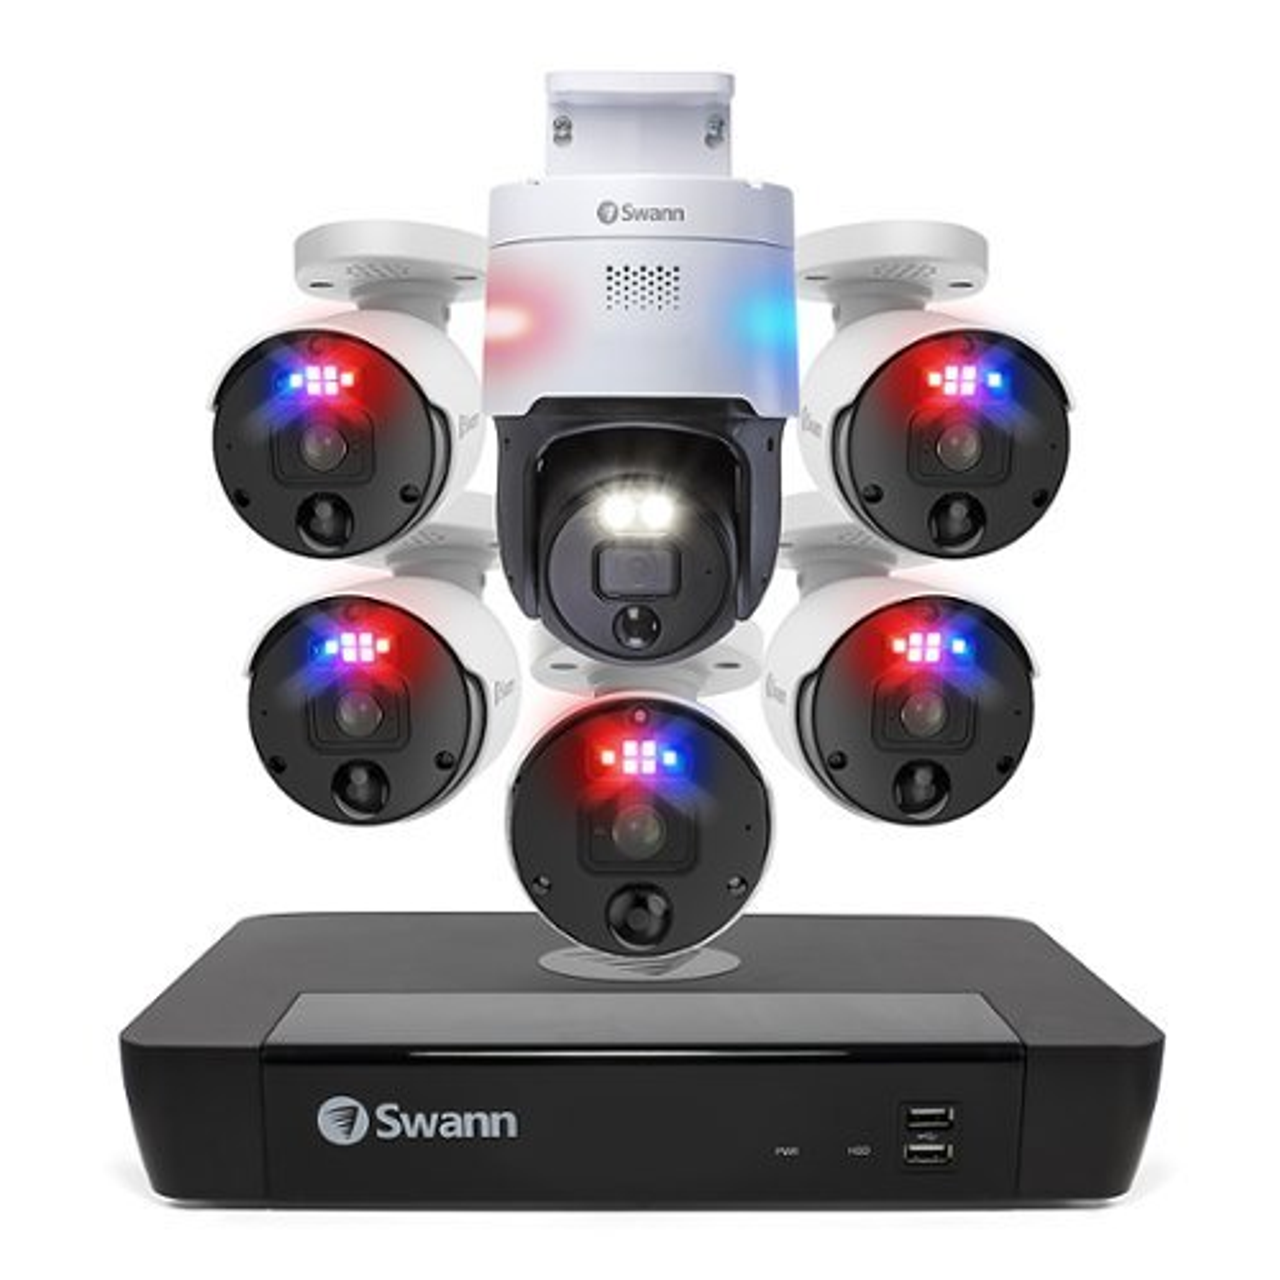 Swann - Pro Enforcer, 8-Channel, 5 Bullet Camera 12MP, 1 Pan Tilt Camera 4K, Indoor/Outdoor Wired 2TB NVR Home Security System - White